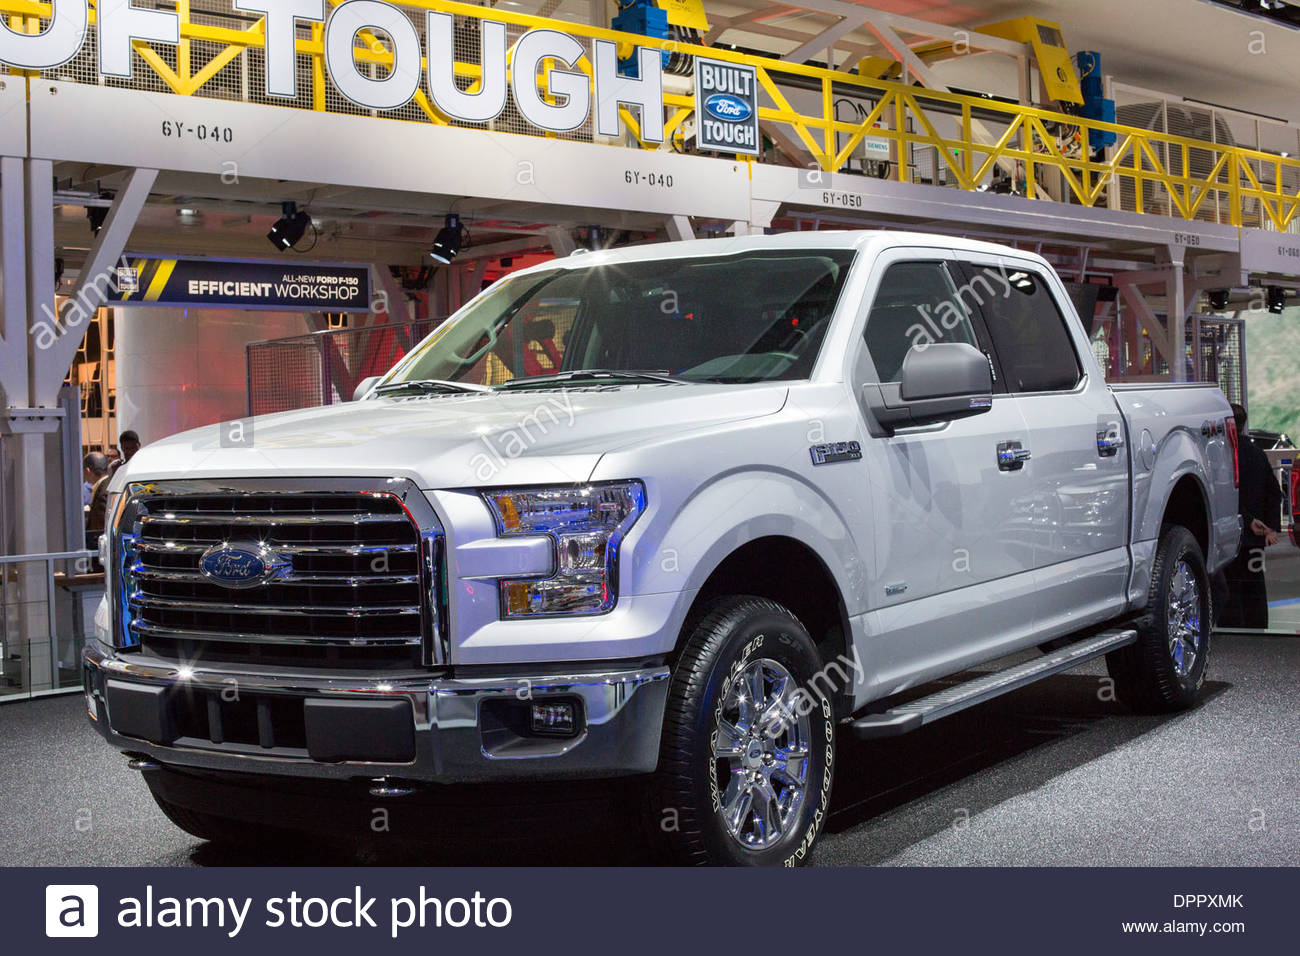 Detroit, Michigan - The Ford F-150 4x4 pickup truck on display at the North American International Auto Show. Stock Photo